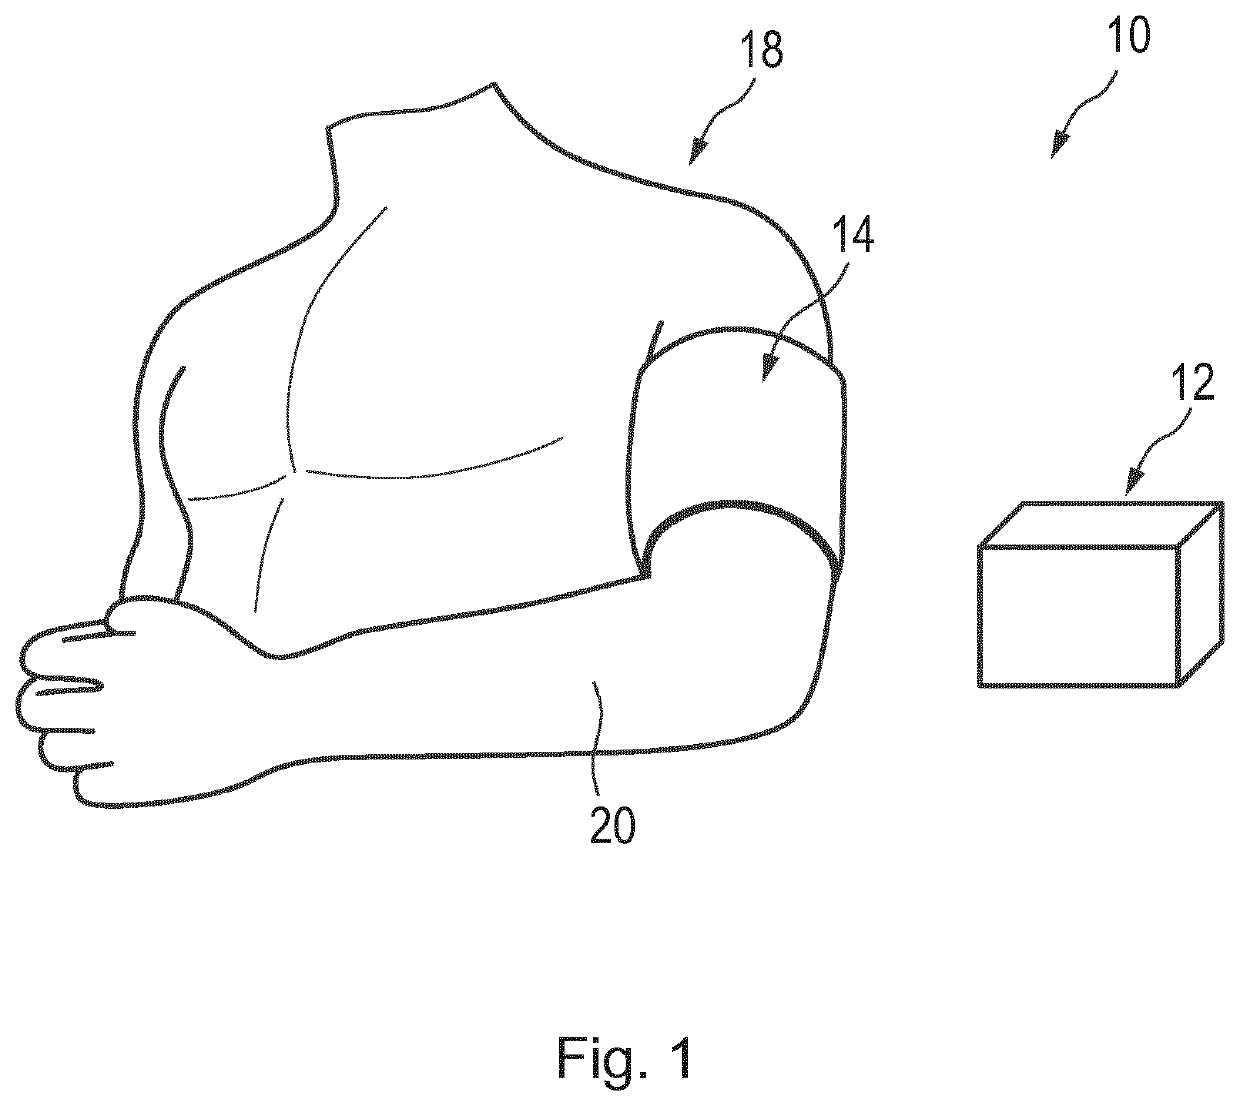 An apparatus for use with a wearable cuff